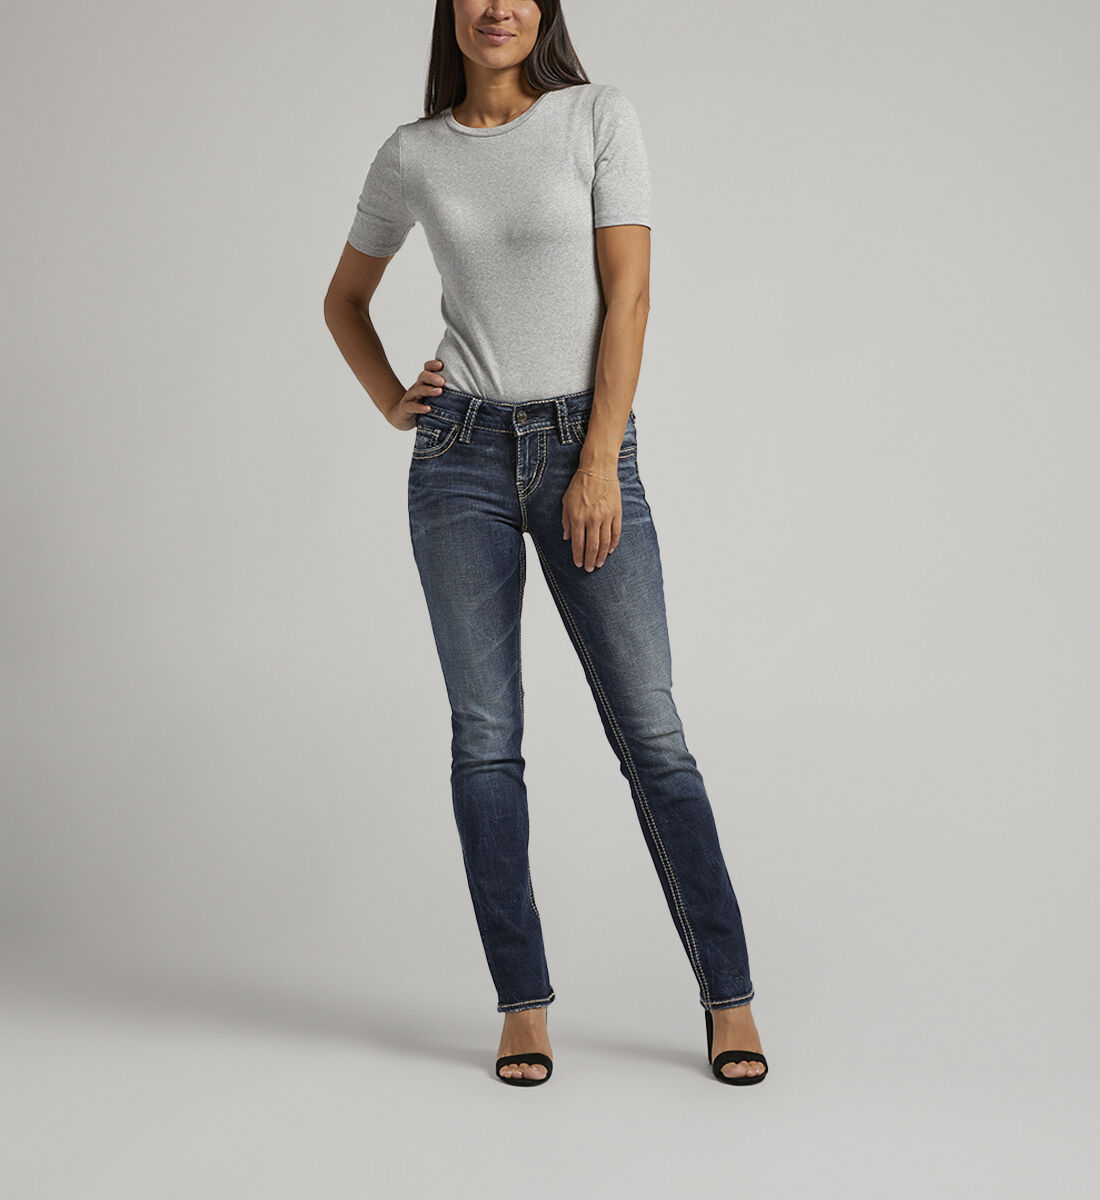 Women's Jeans That Fit | Silver Jeans Co.